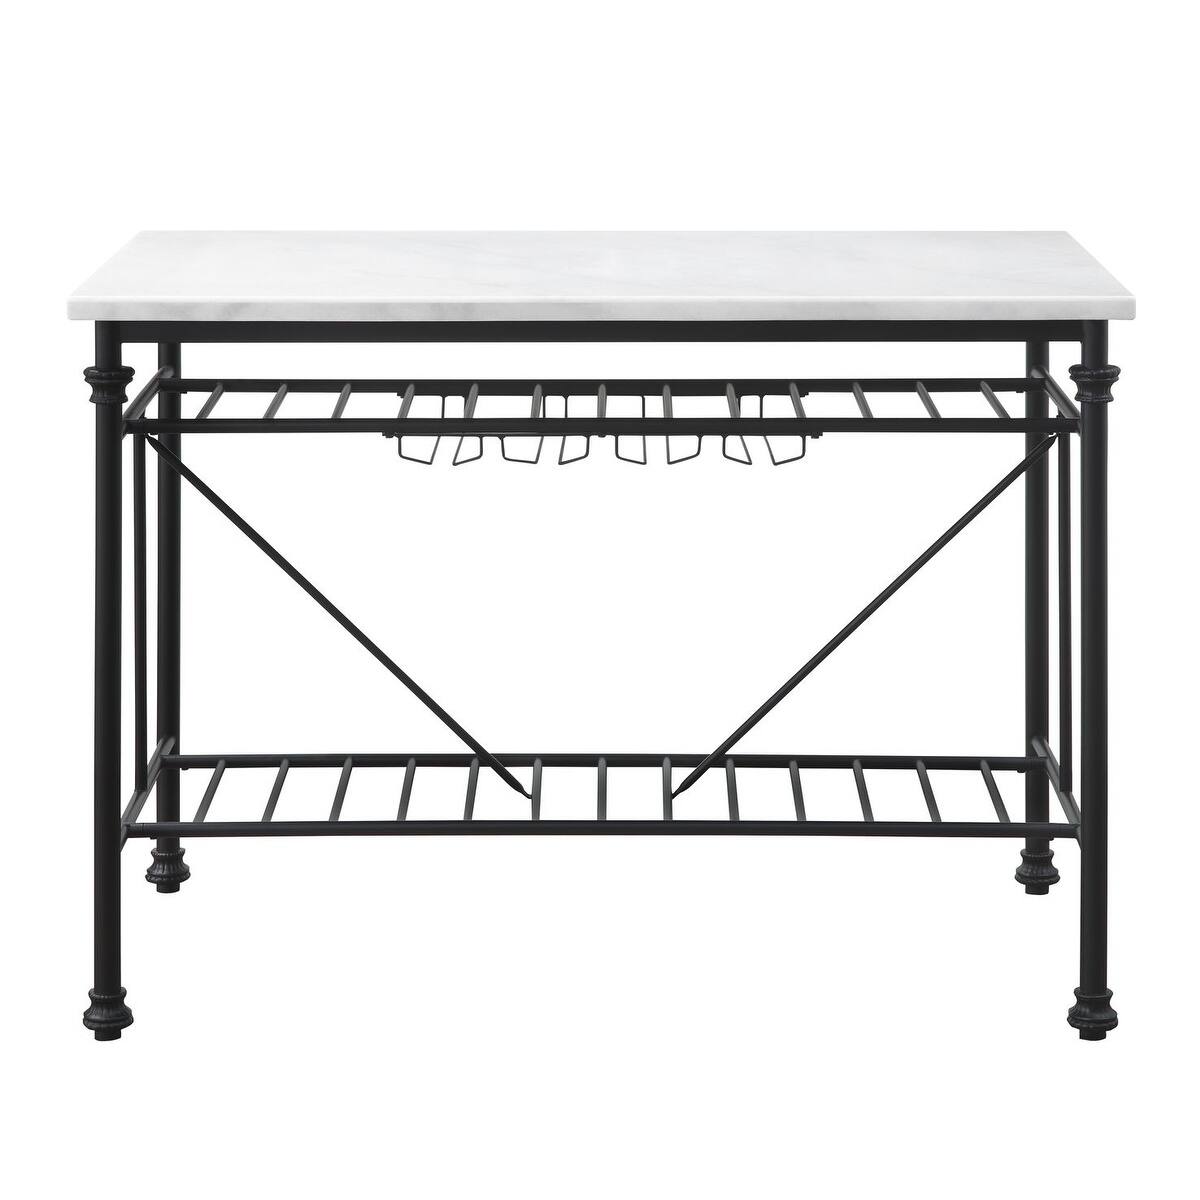 Metal Slatted Shelves Kitchen Island Storage with Bottle Rack and Wine ...